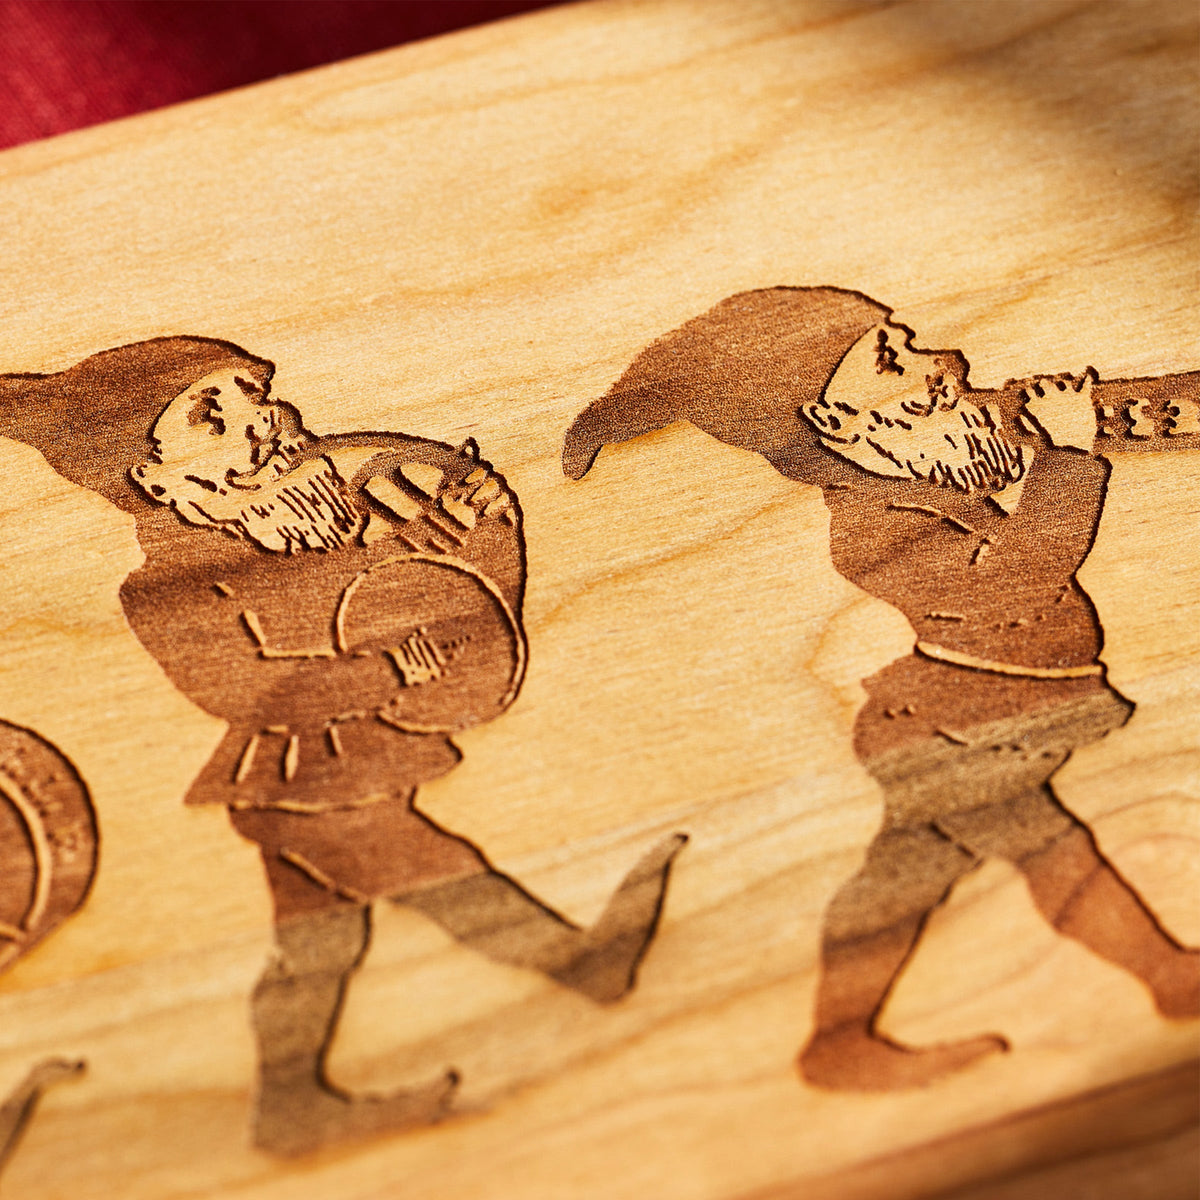 A Caskata Elves Serving Board with three gnomes on it, exuding holiday whimsy.